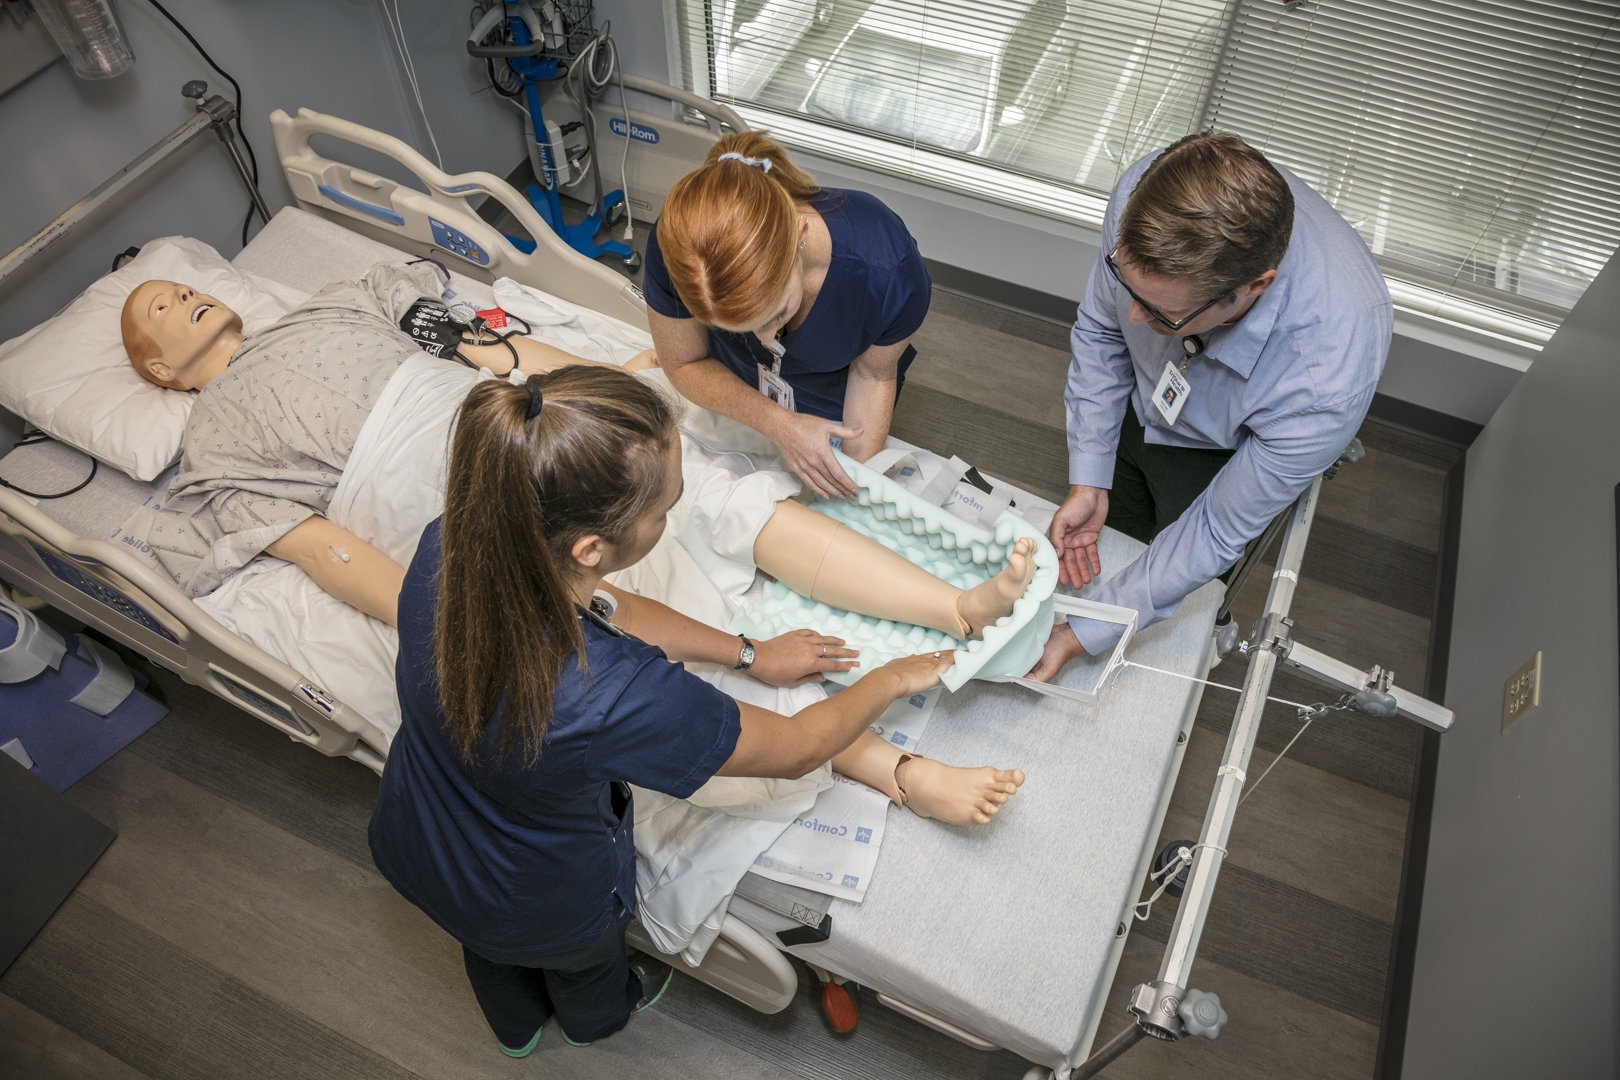 Two female nurses and a male instructor practice care on a mannequin in a hospital bed